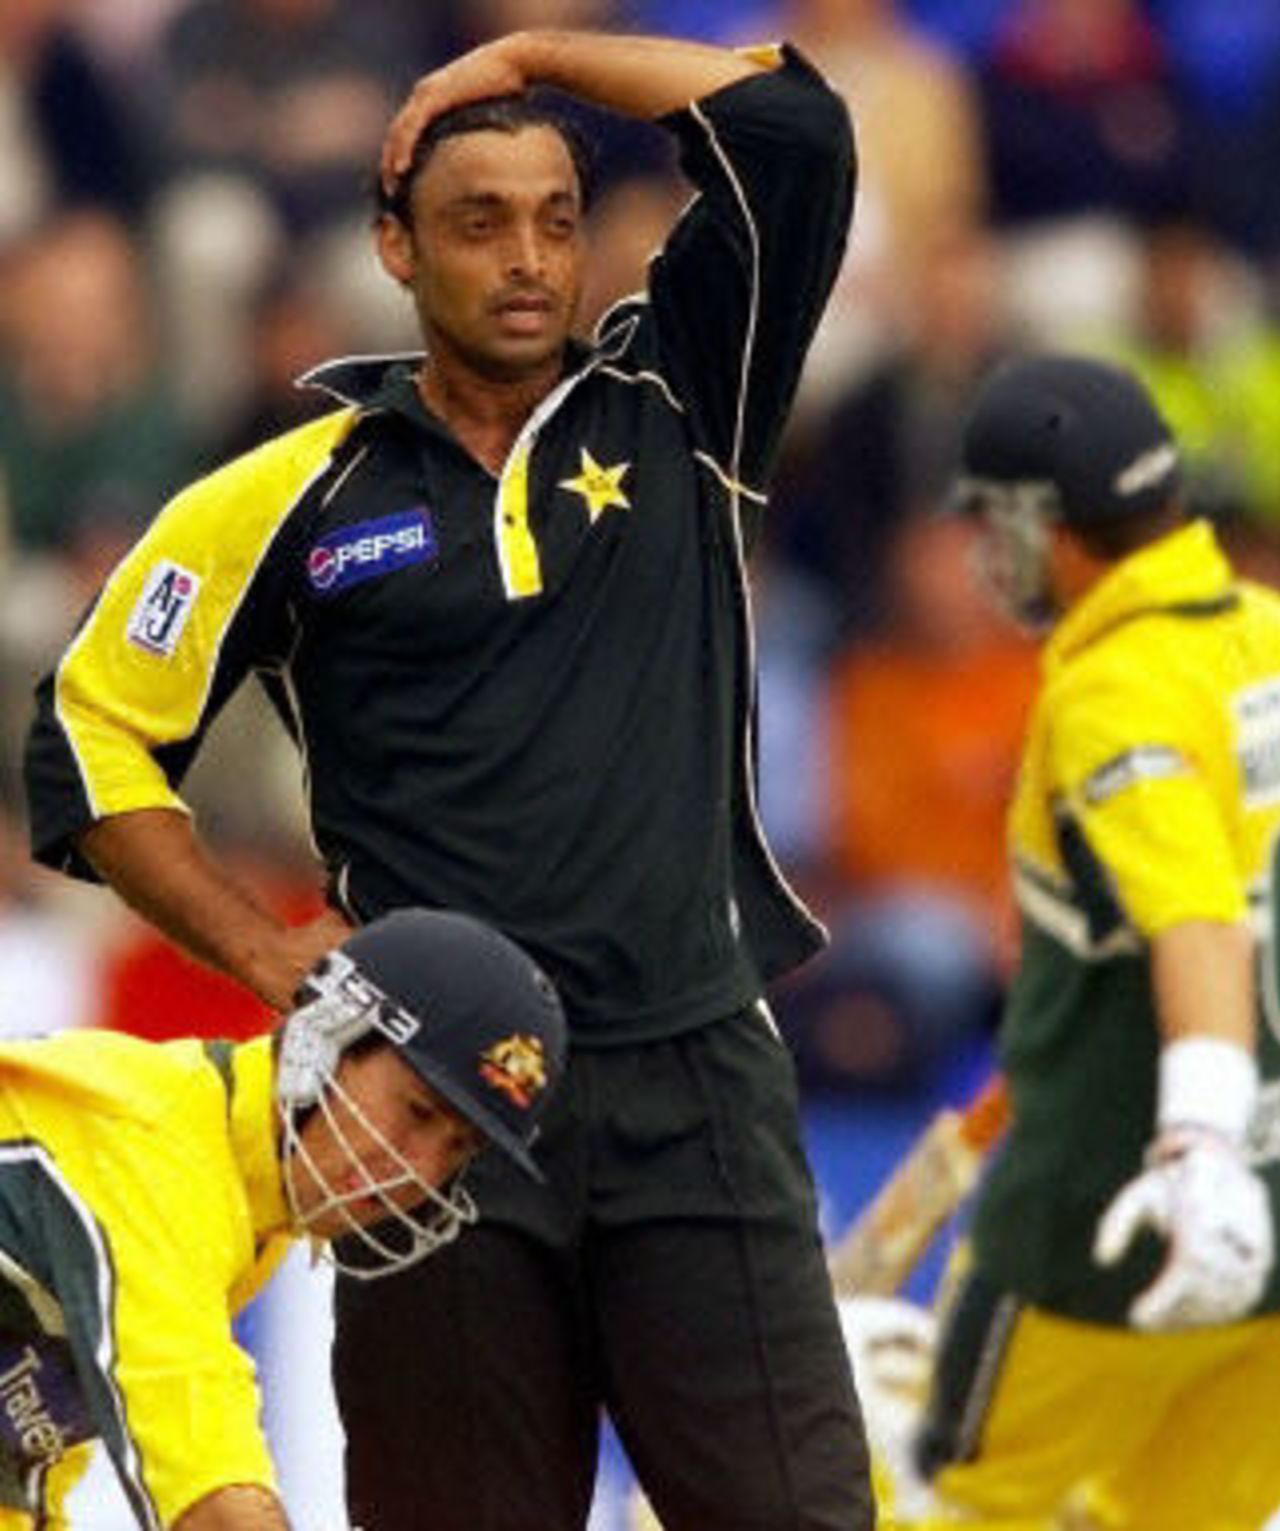 Shoaib Ahktar looks on in dismay as Ricky Ponting and Mark Waugh plunder his bowling, 2nd ODI at Cardiff, 9 June 2001.